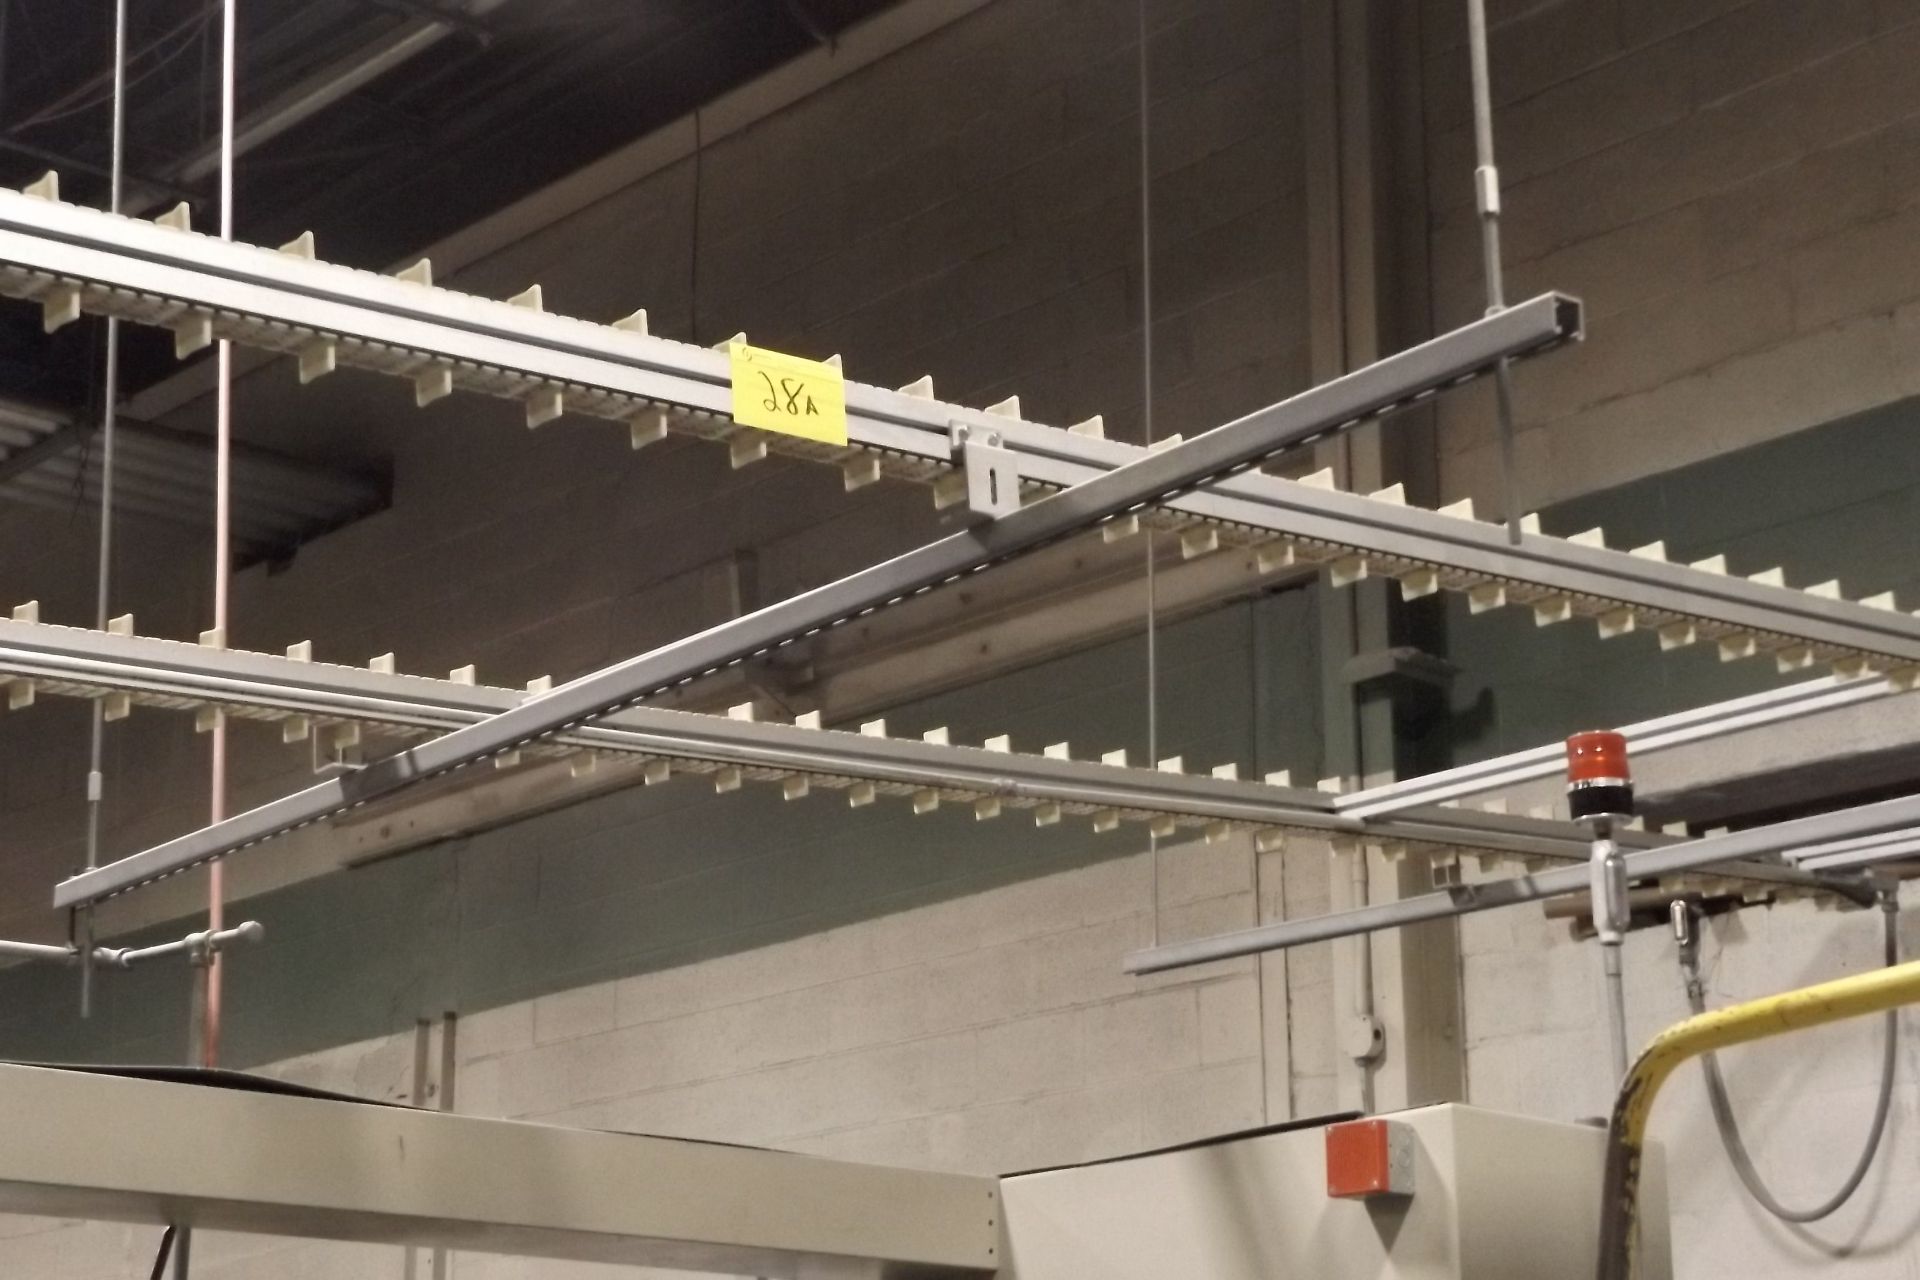 LOT OF FLEX LINK CONVEYOR BELTS, 40' OF DOUBLE TRACK W/ DRIVEN CORE ELEVATOR, (CORE ROOM) - Image 3 of 4